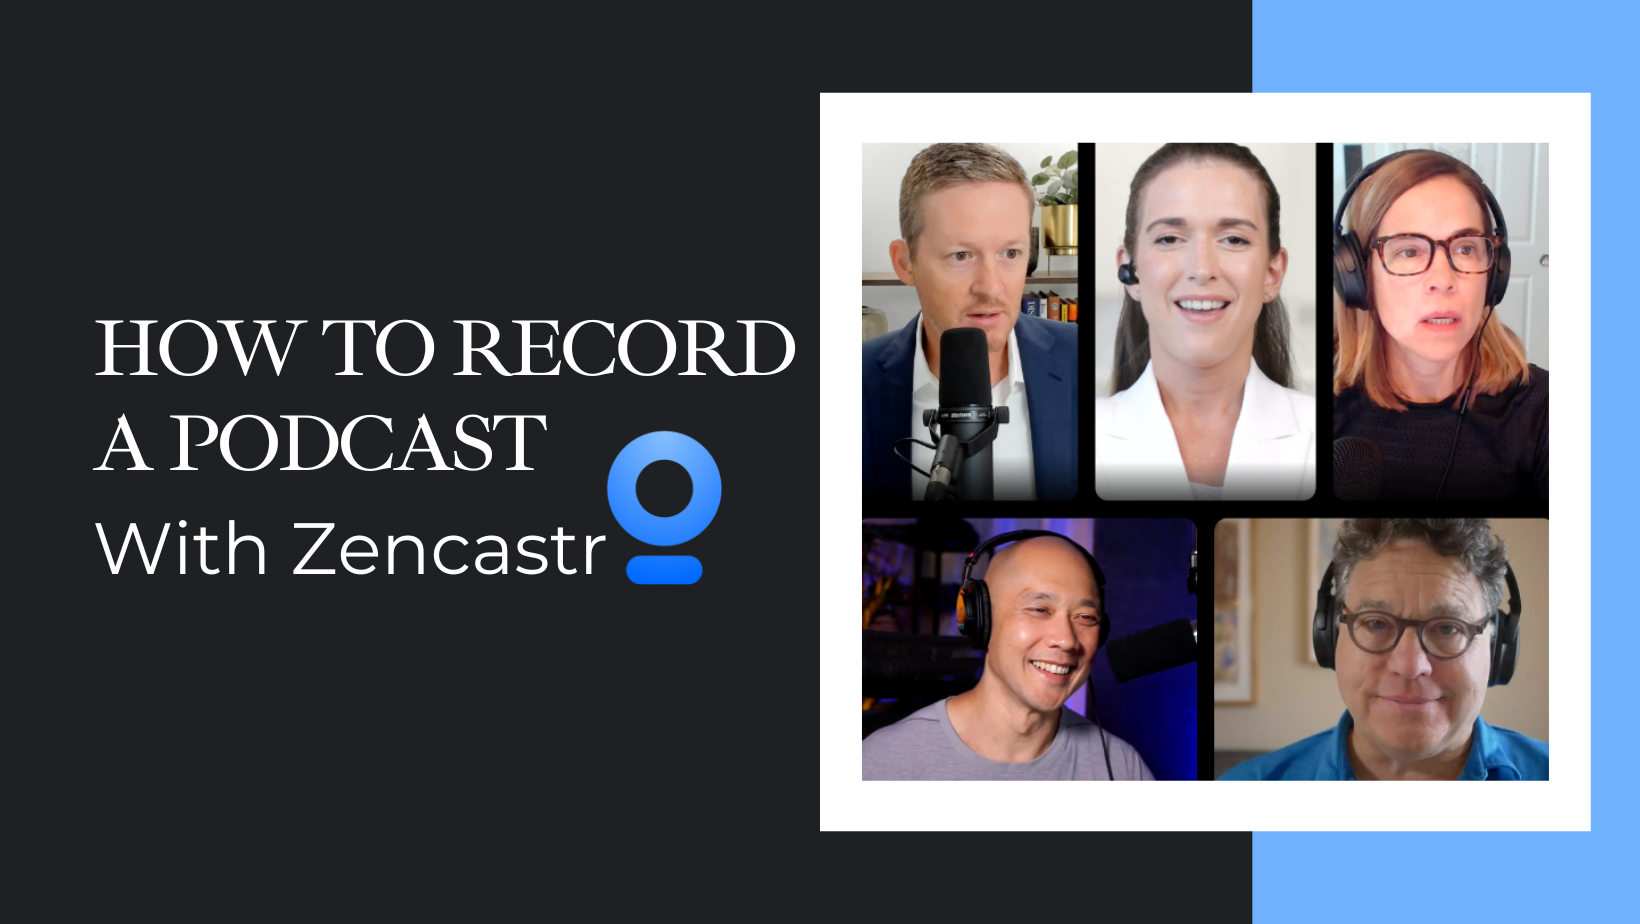 How To Record A Podcast With Zencastr